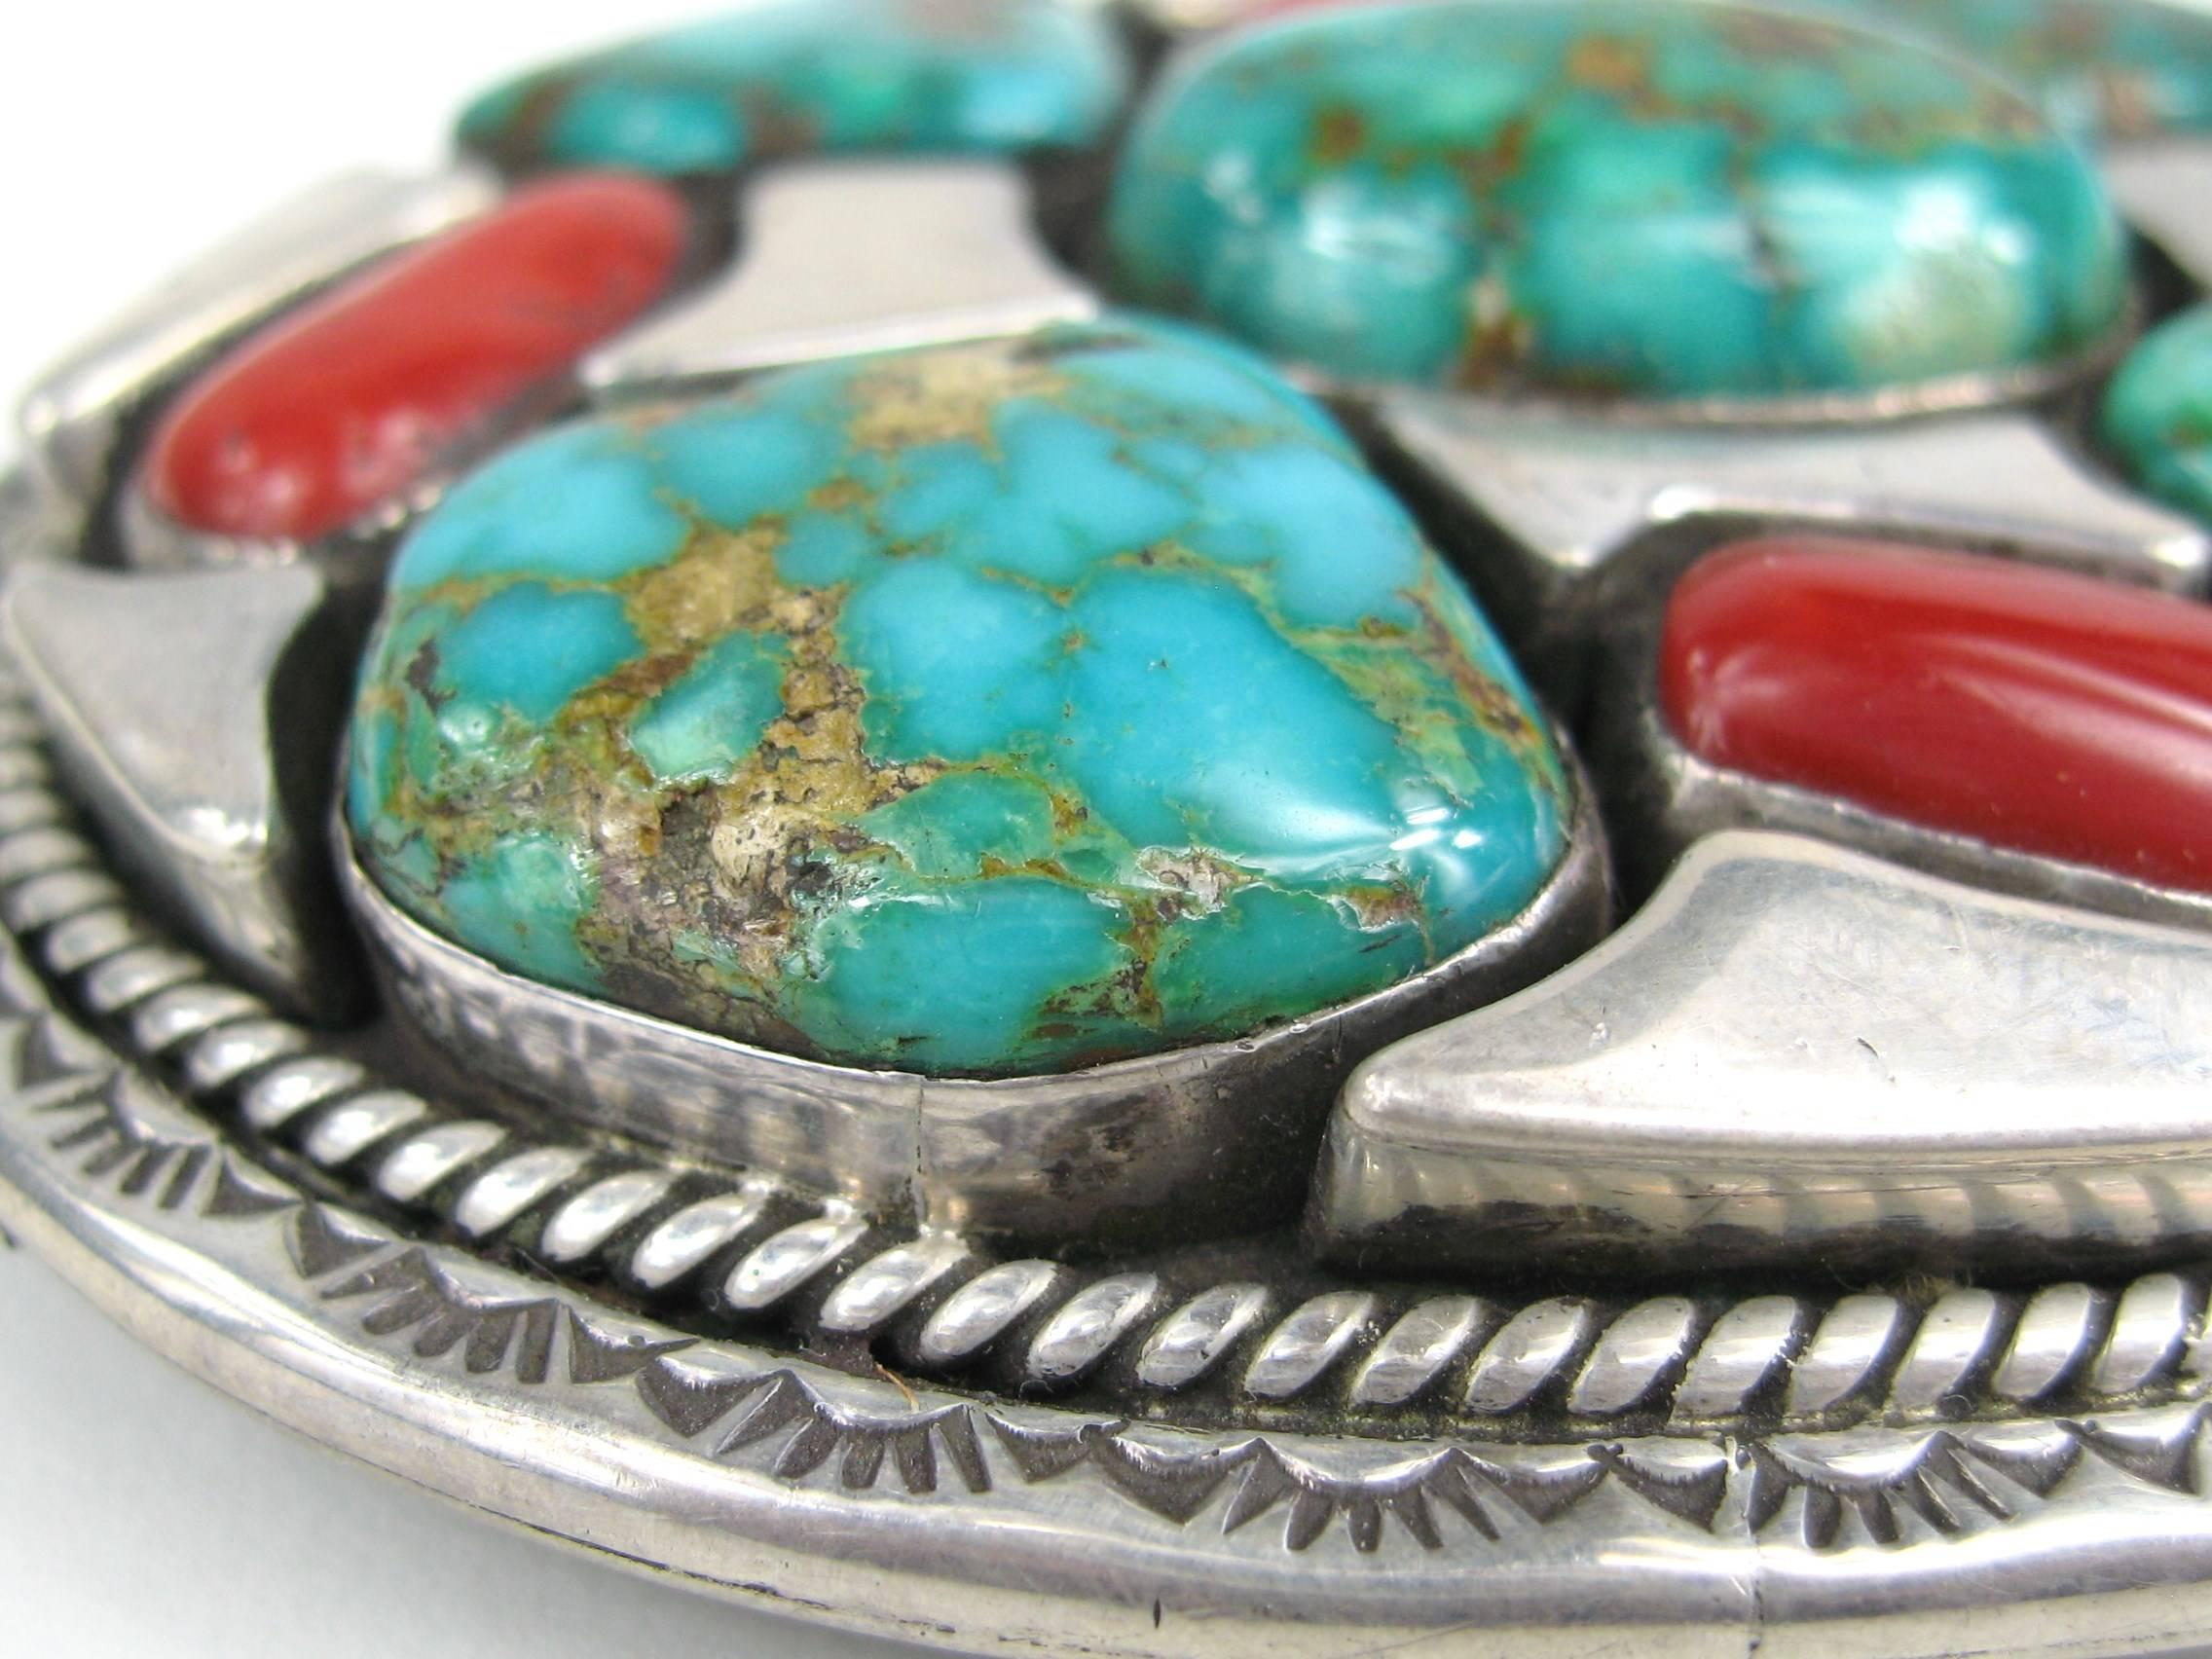 This stunning piece made by Navajo artisan Vandever is made up of huge pieces of Turquoise and coral. This measures 3.53 x 2.88 inches and Hallmarked on the back. This is out of a massive collection of Hopi, Zuni, Navajo, Southwestern and sterling